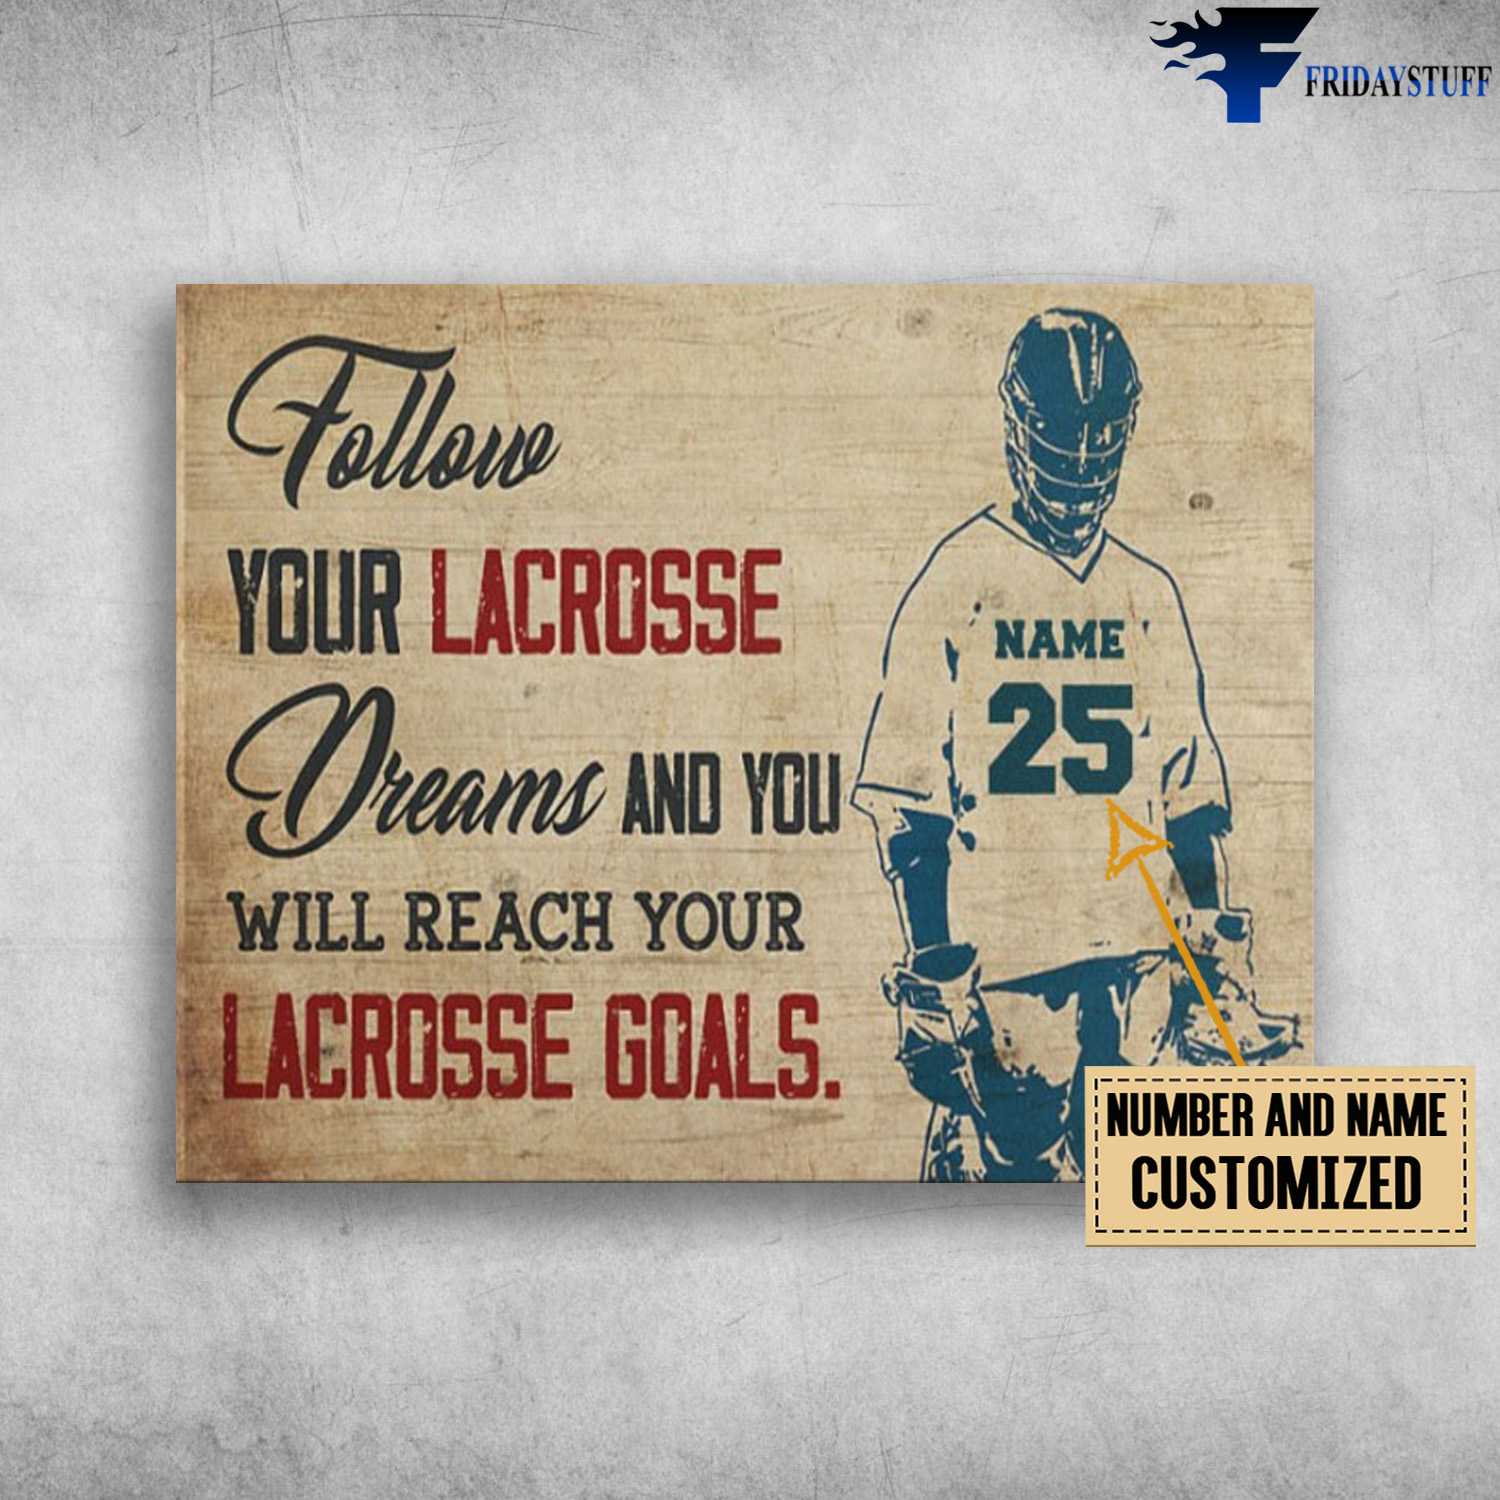 Lacrosse Player, Follow Your Laccrosse, Dreams And You Will Reach You, Laccrosse Goals